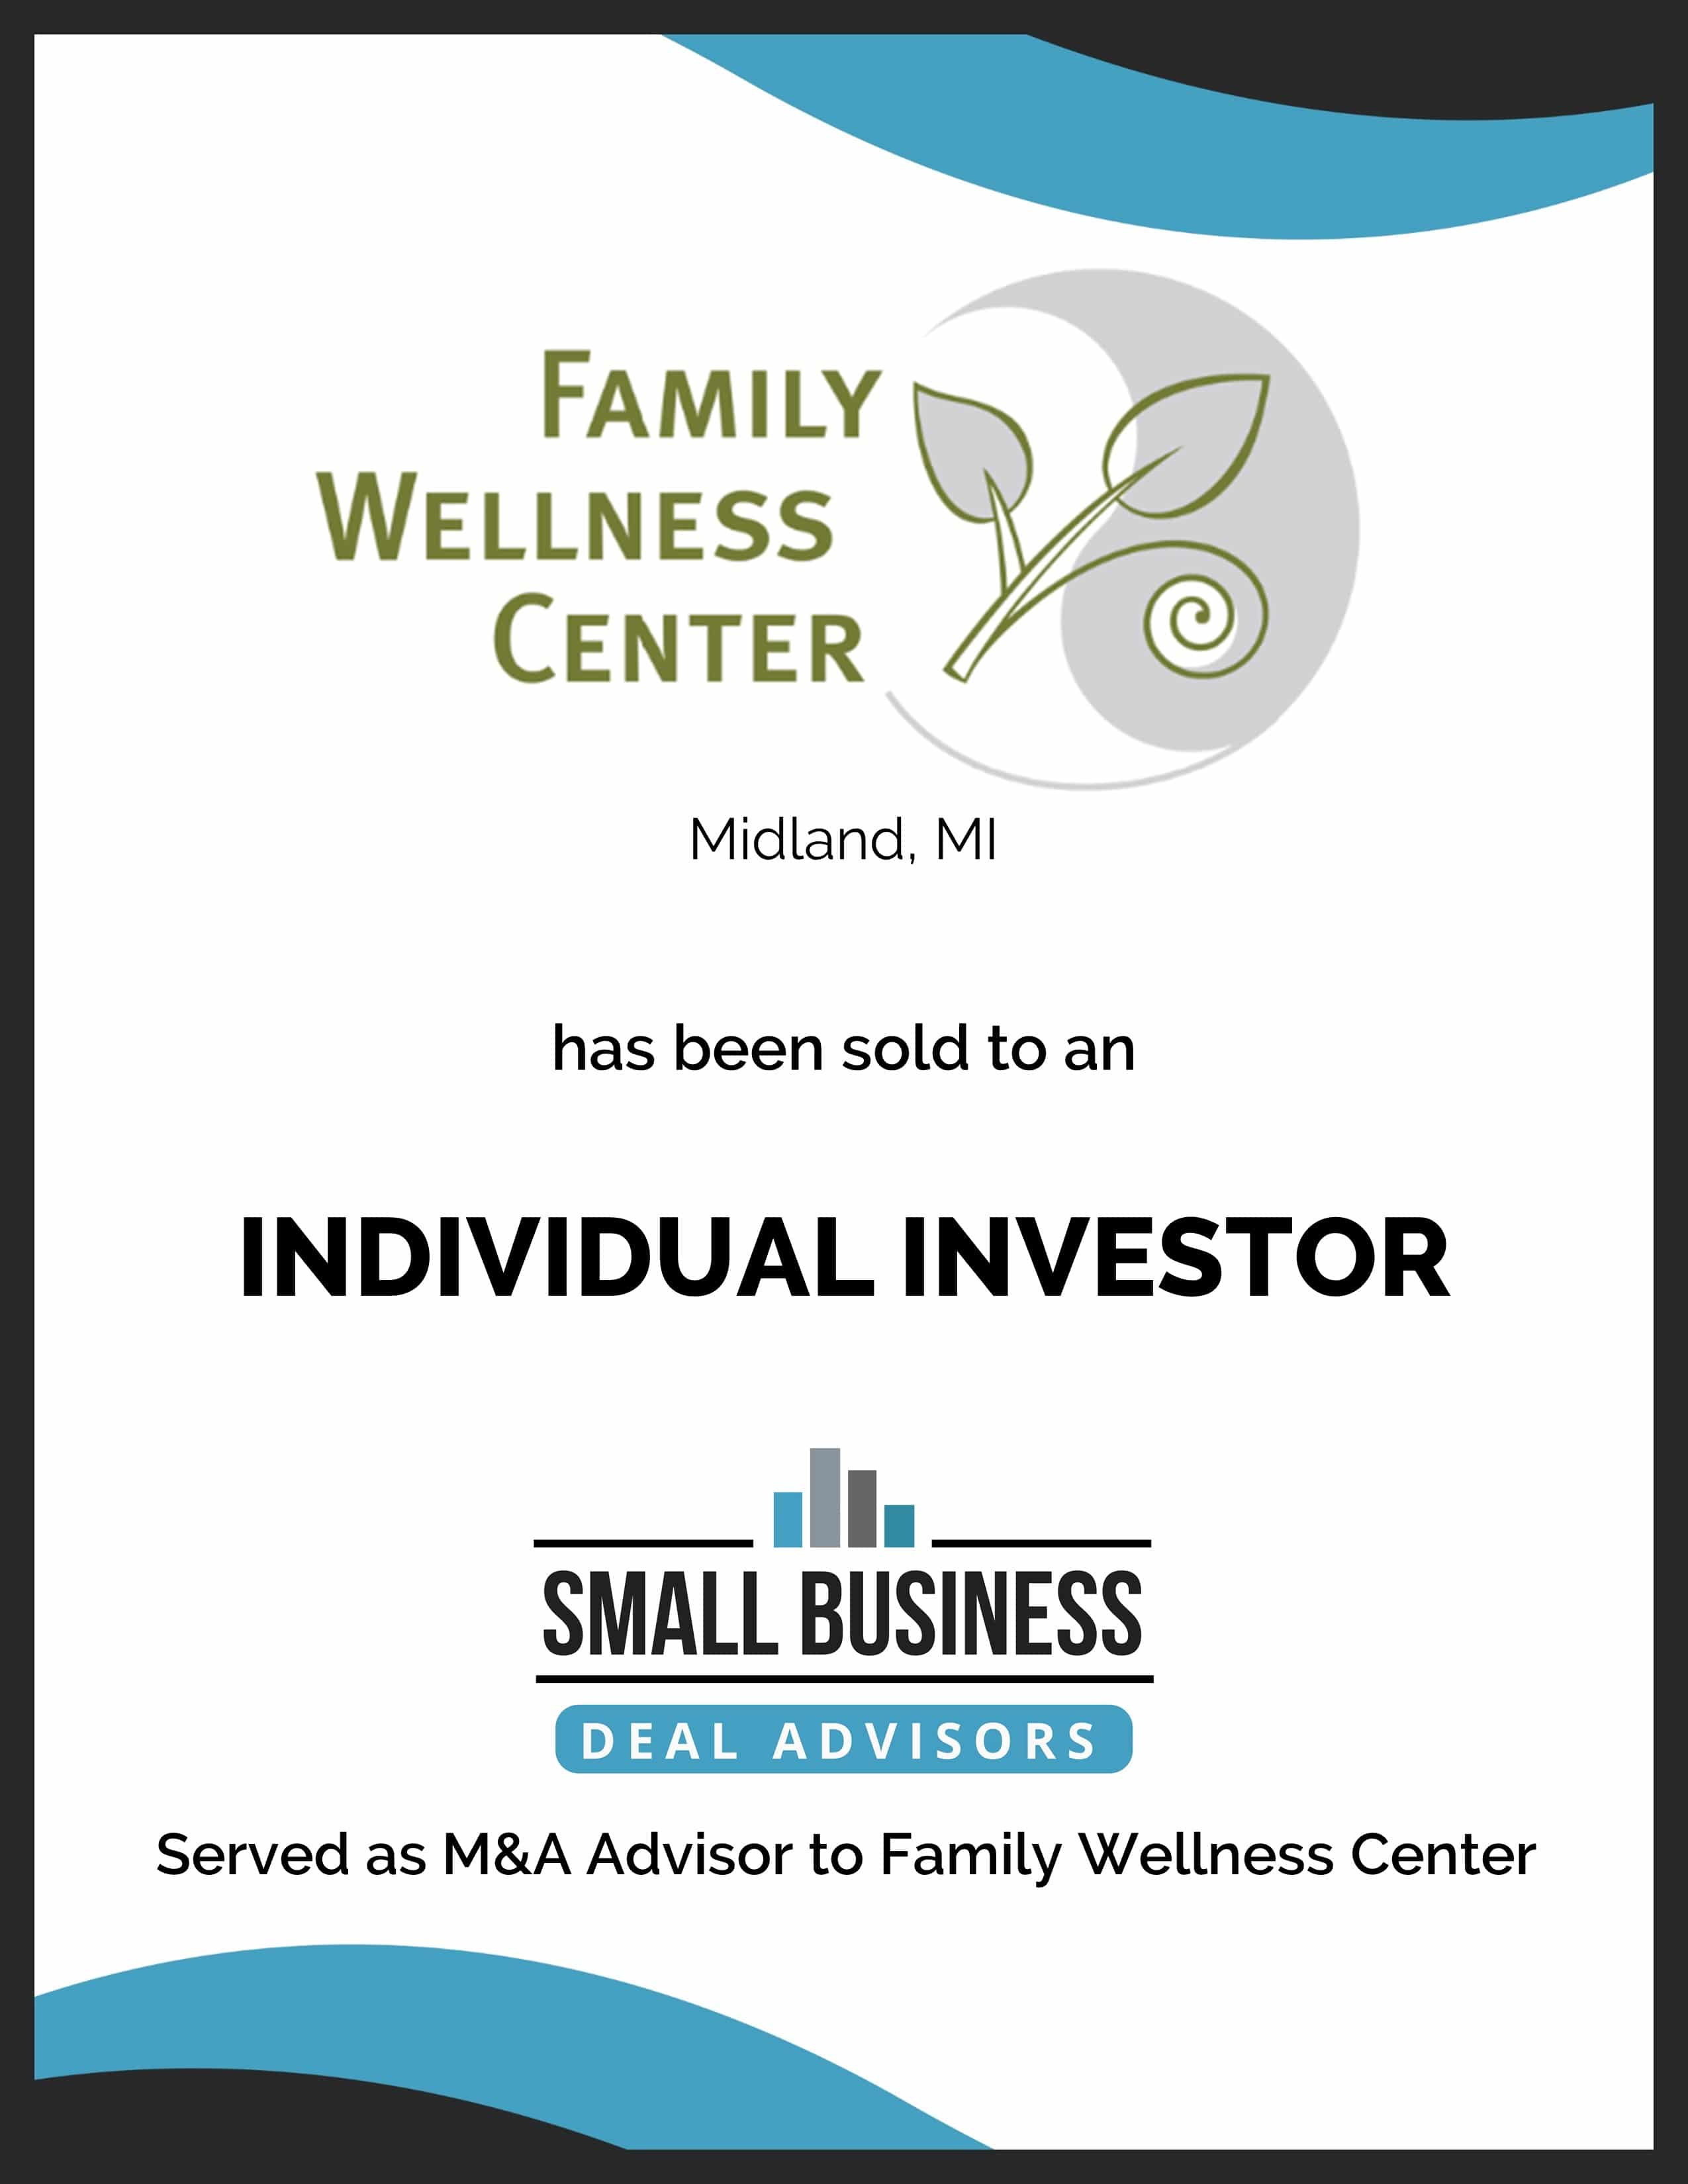 Family Wellness Center has been sold to an individual investor